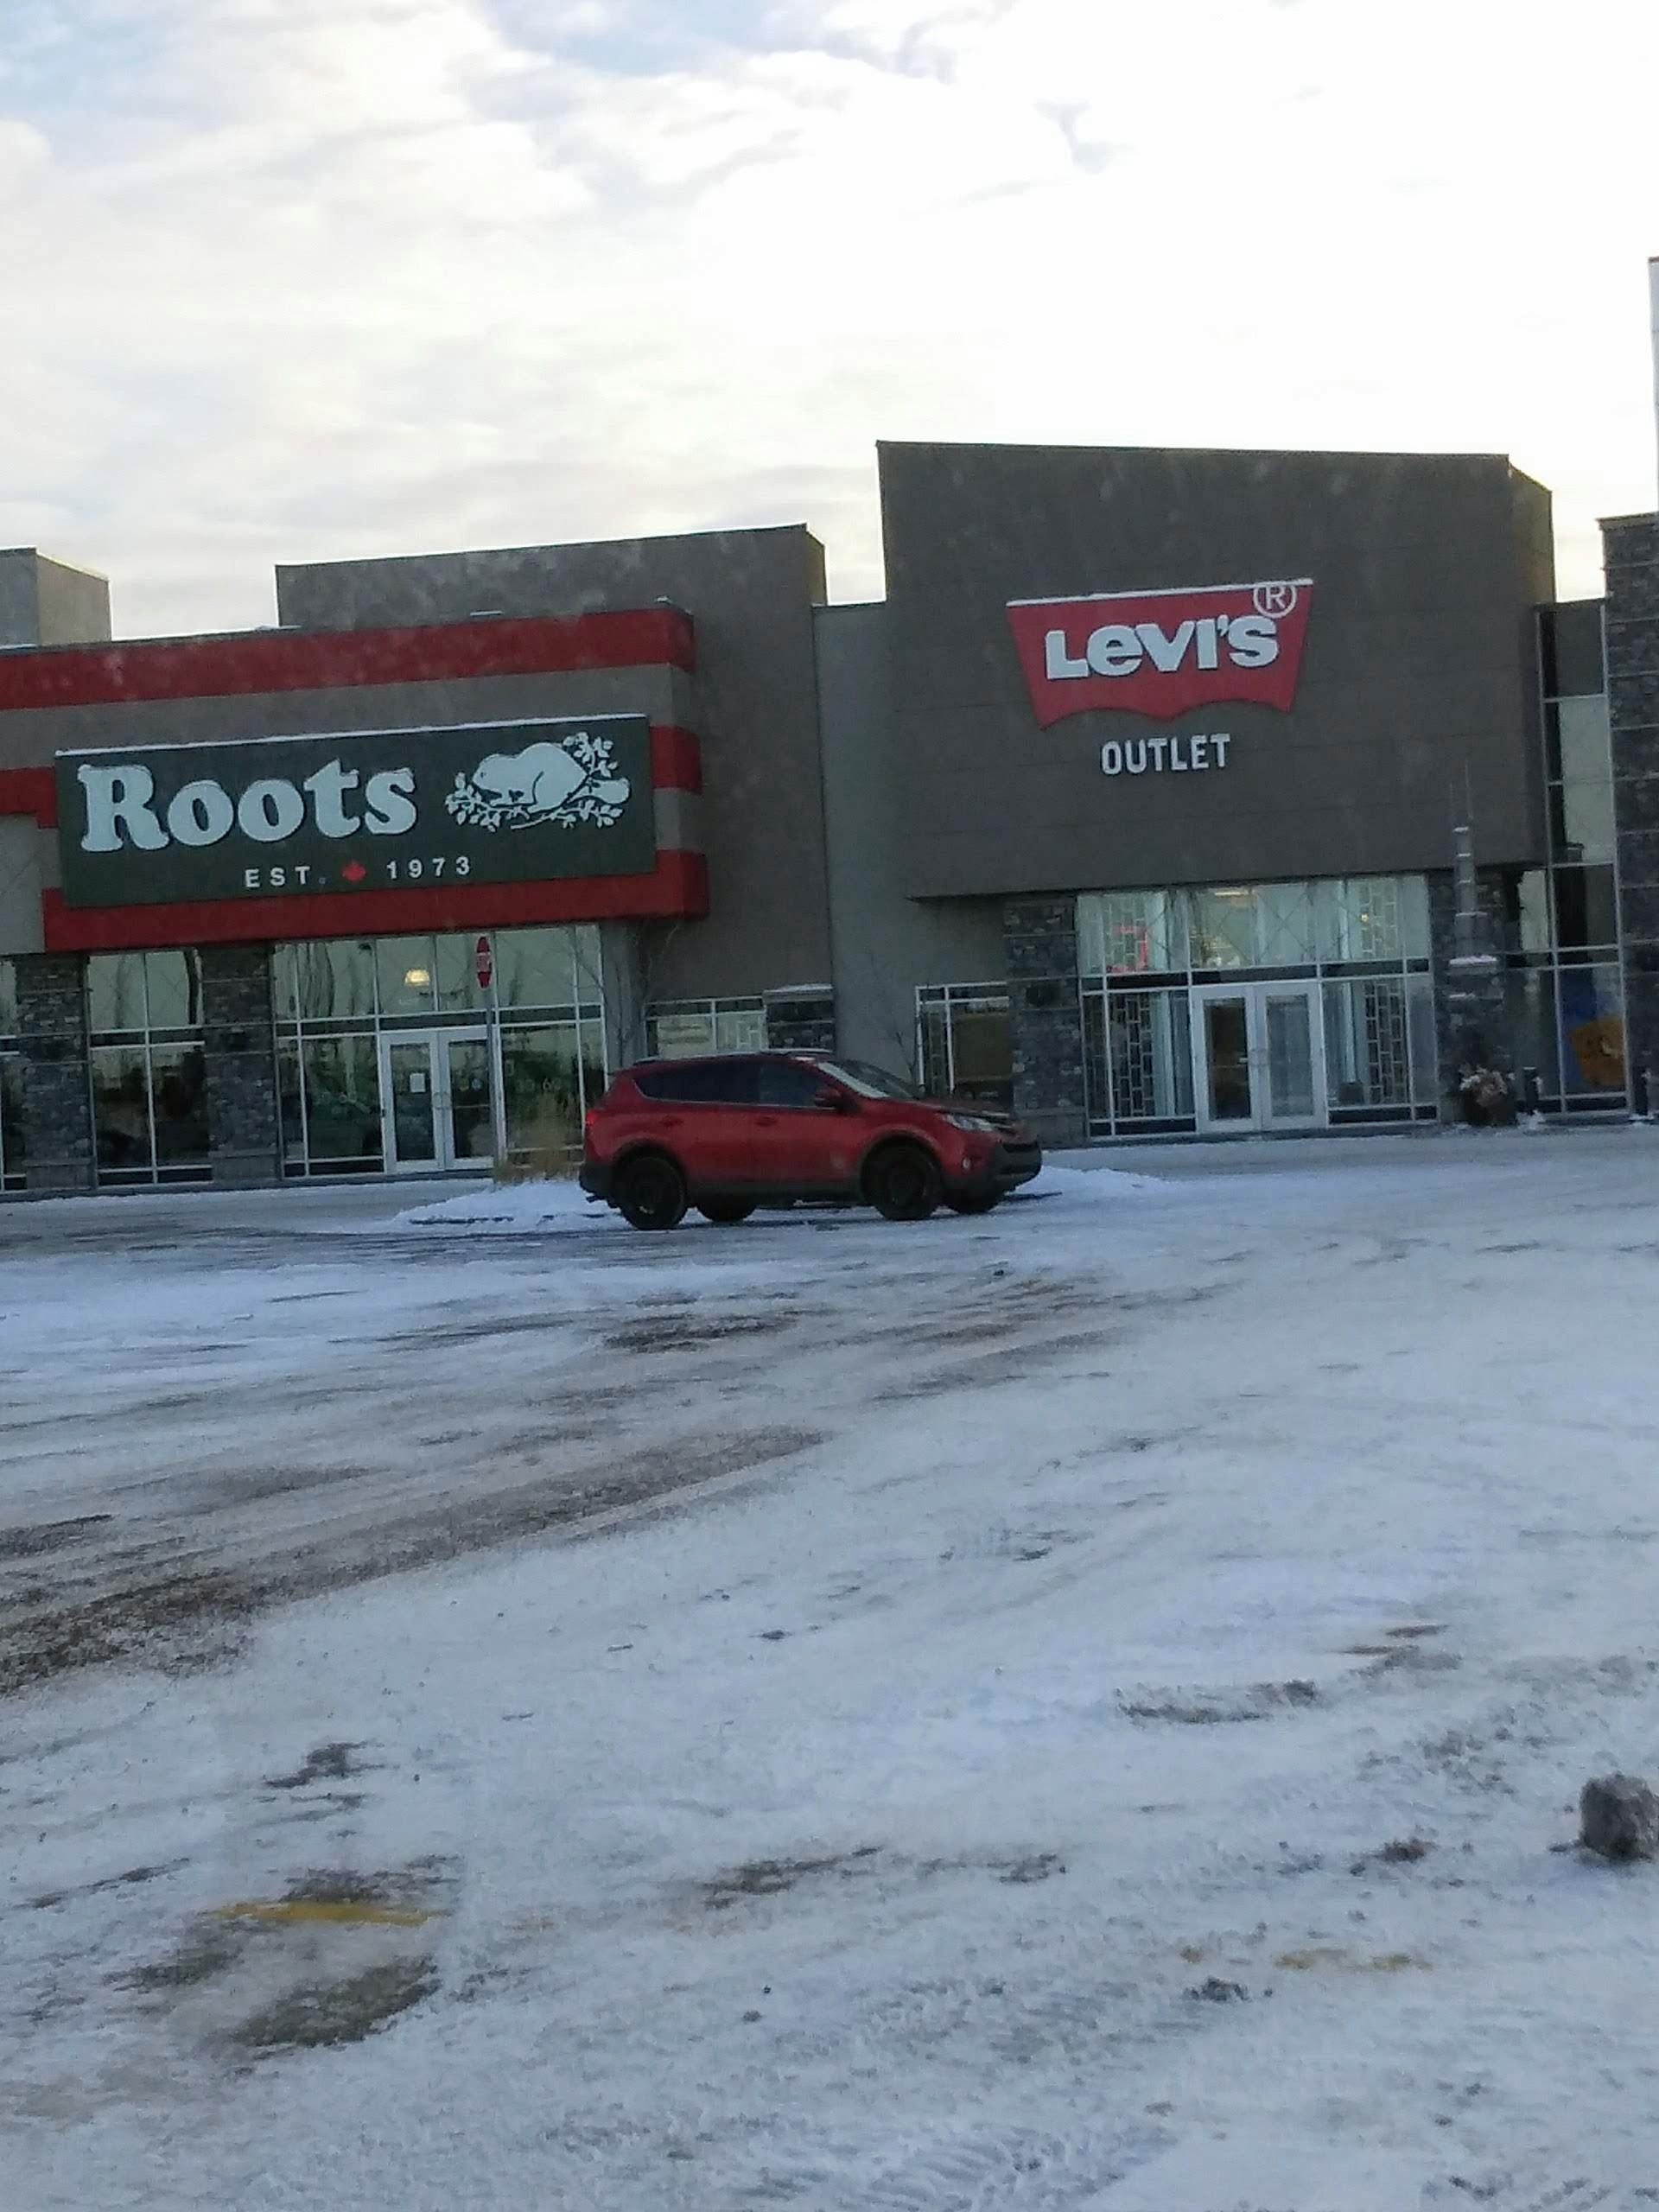 ROOTS AND LEVI'S OUTLETS